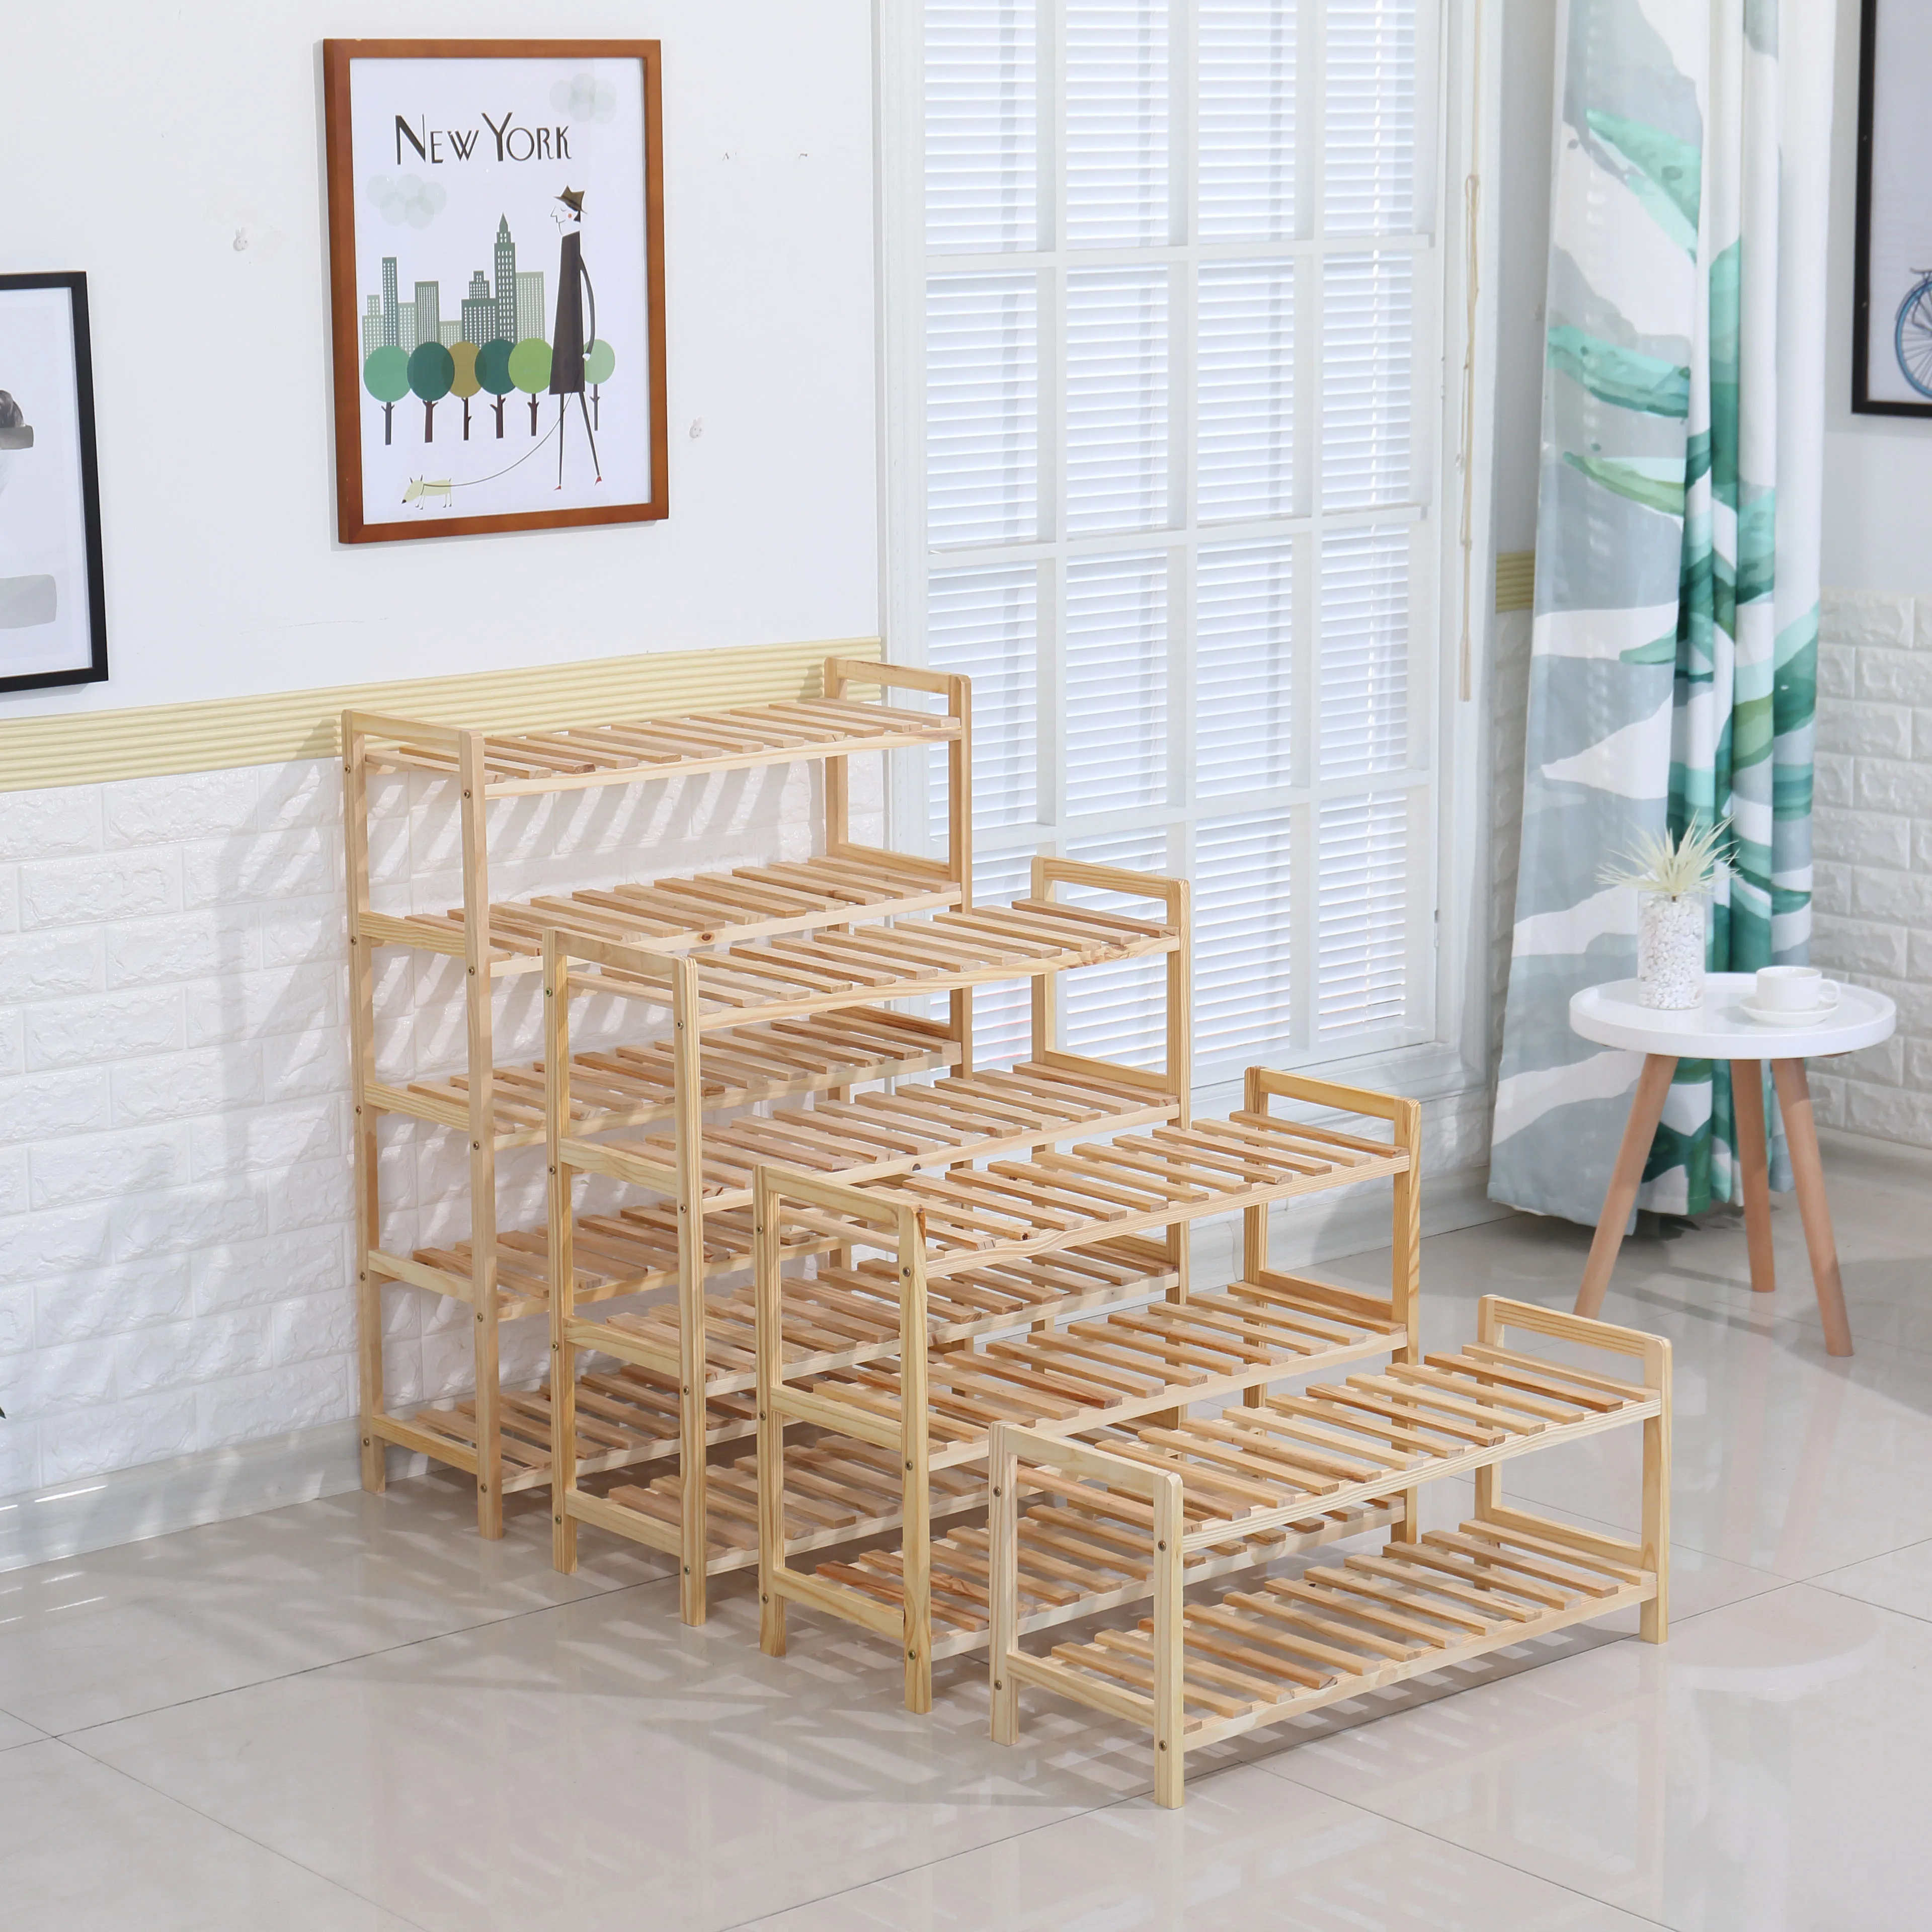 
Promotional High Quality 3tiers Wooden Rack Storage Shoe Racks 